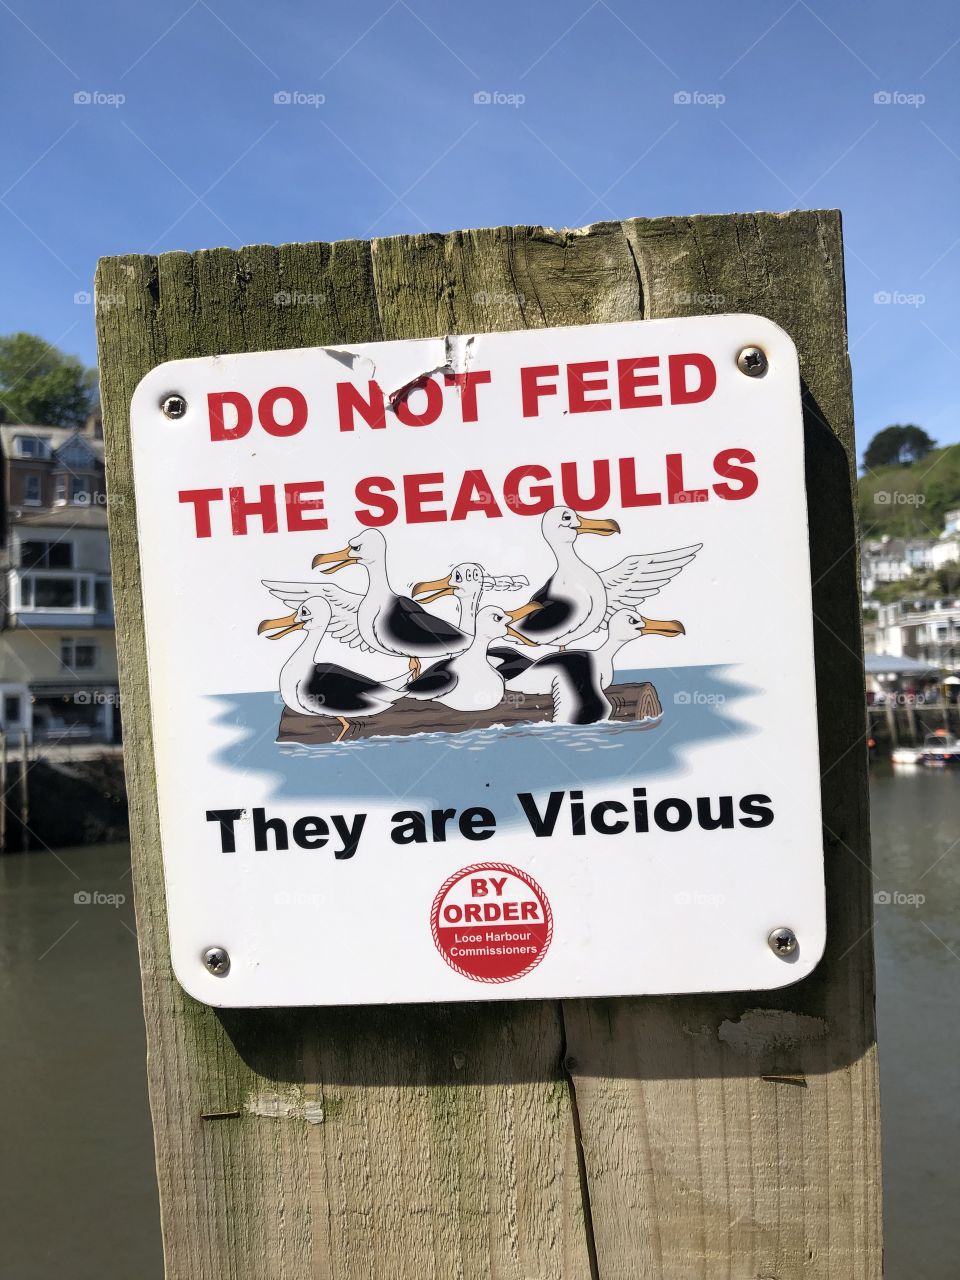 Hilarious signage ….. beware of vicious seagulls in Cornwall…..they will eat your chips and pasties! 